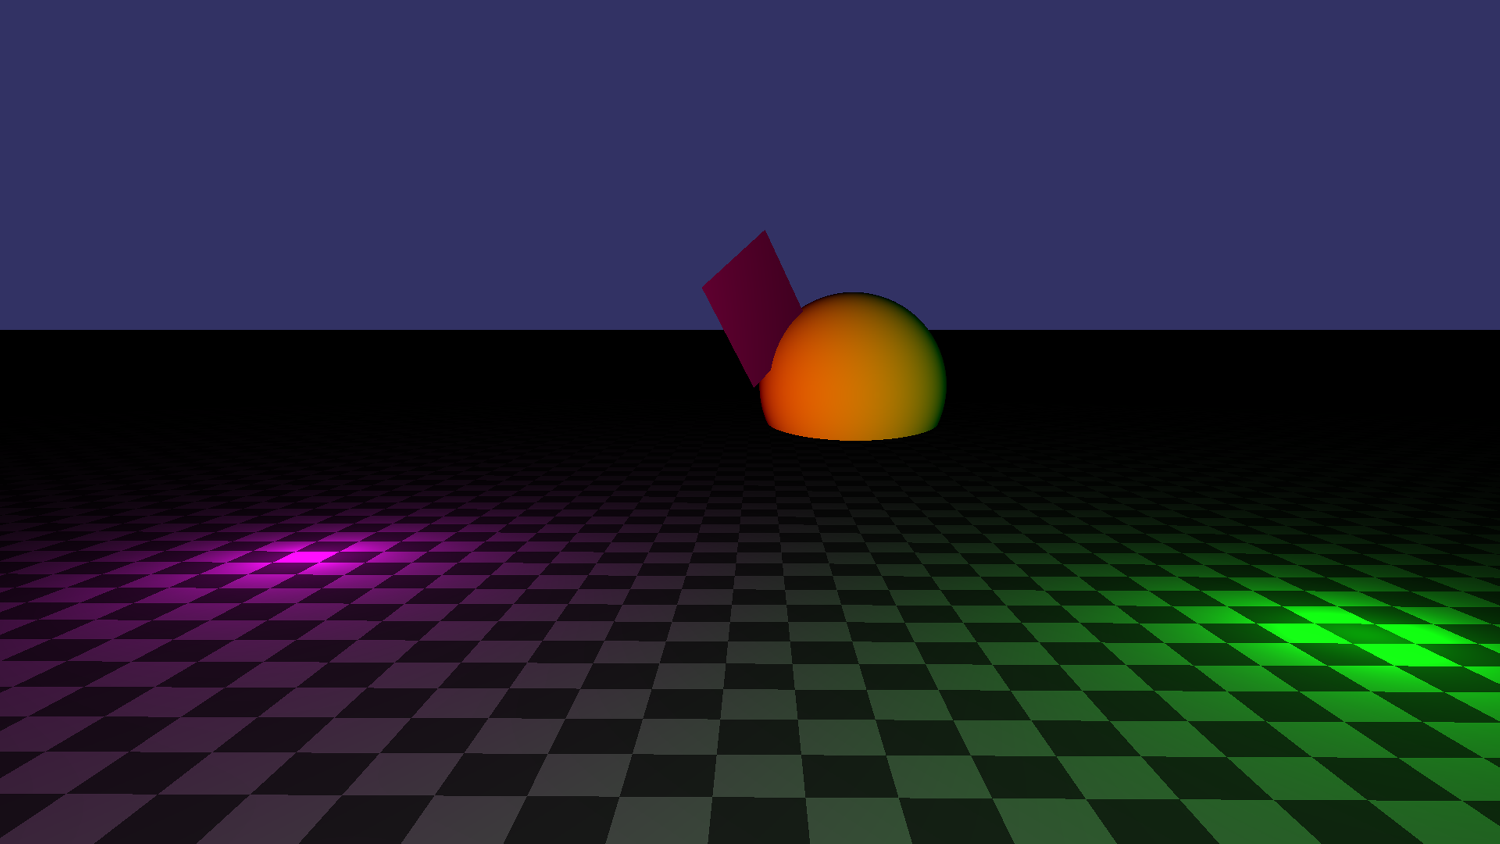 Simple lambert shading being showcased in the scene by two colored lights.[br][br]The scene contains the previous sphere and checkerboard plane, but I also added a non-infinite plane that goes inside the sphere